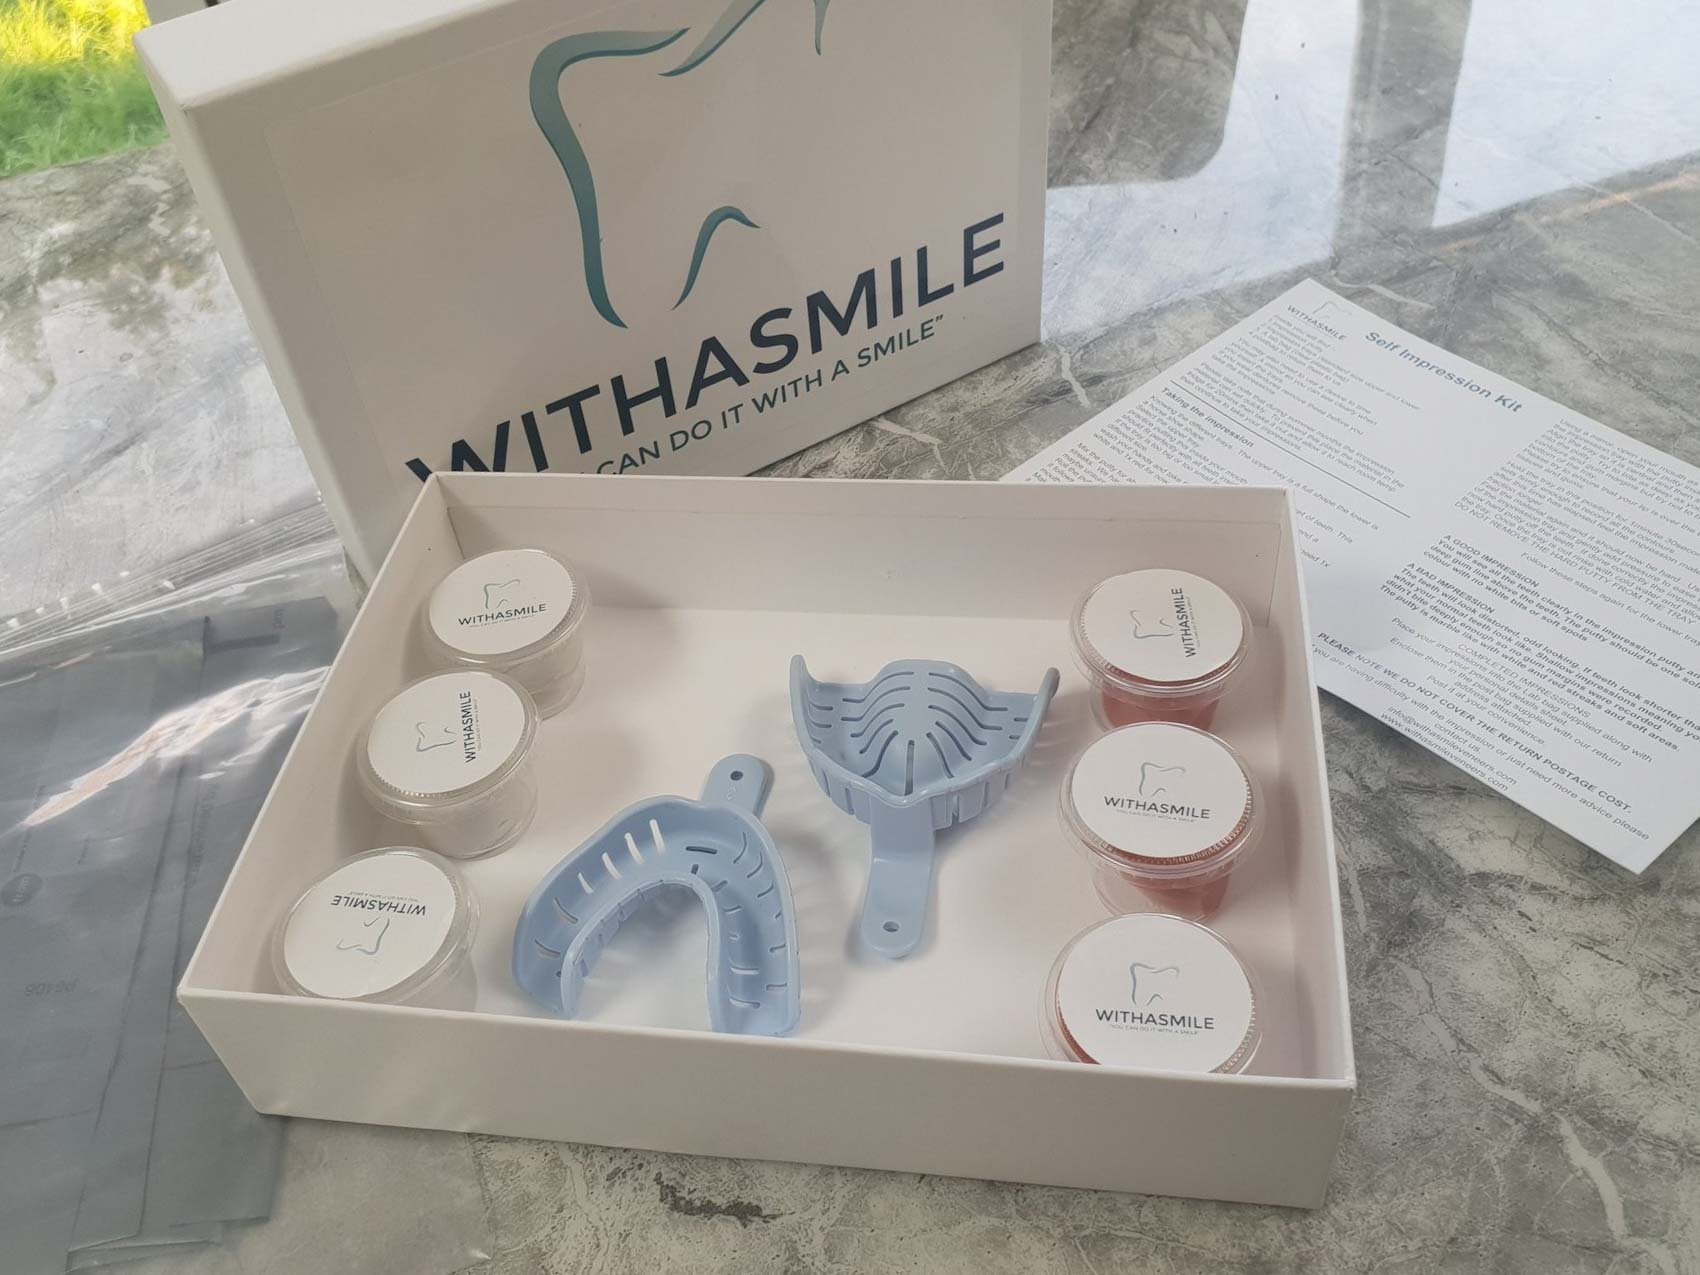 An open box displaying an impression kit used for creating personalised dental veneers